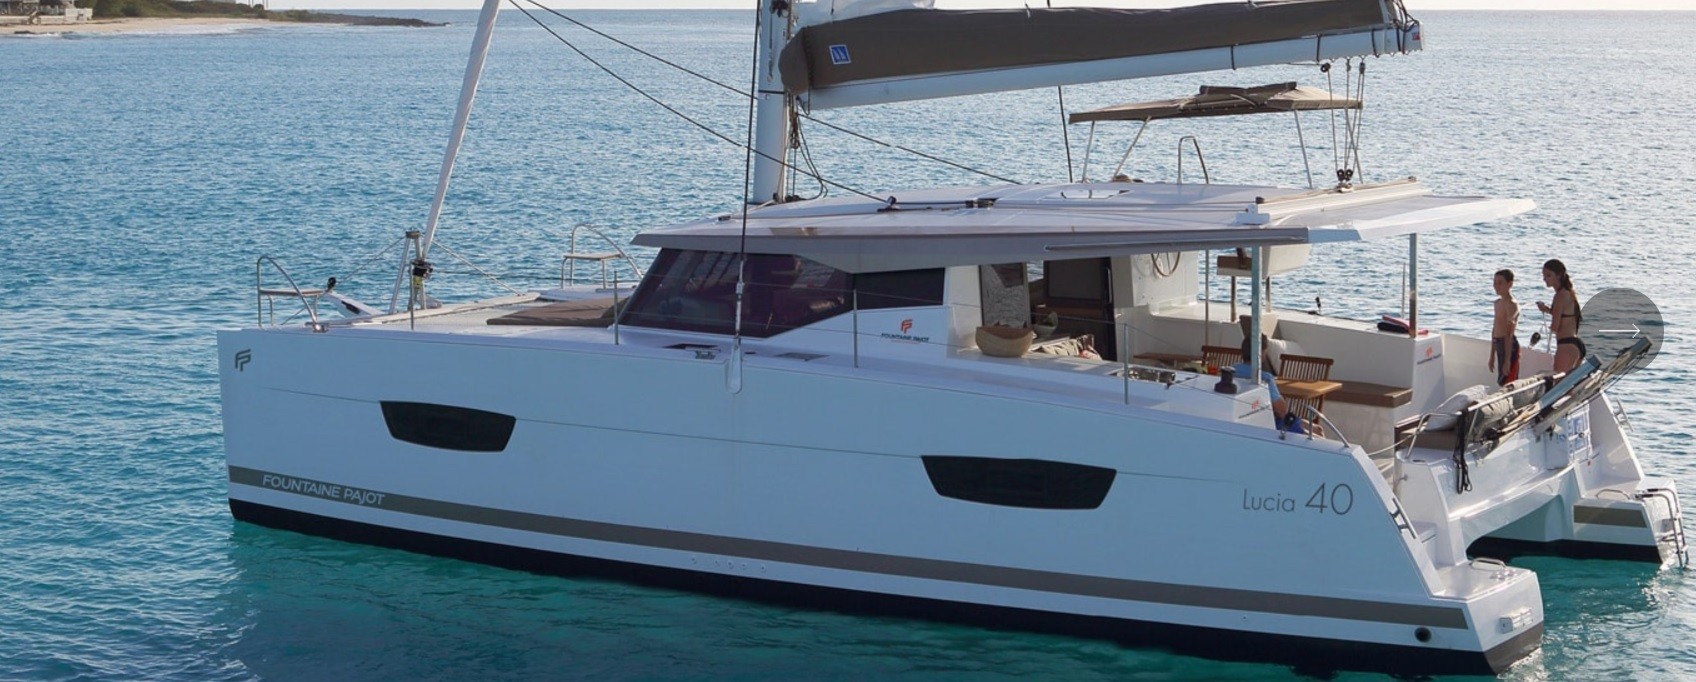 Fountaine Pajot Lucia 40 - Yacht Charter Guadeloupe & Boat hire in Guadeloupe Pointe a Pitre Marina de Bas du Fort 1